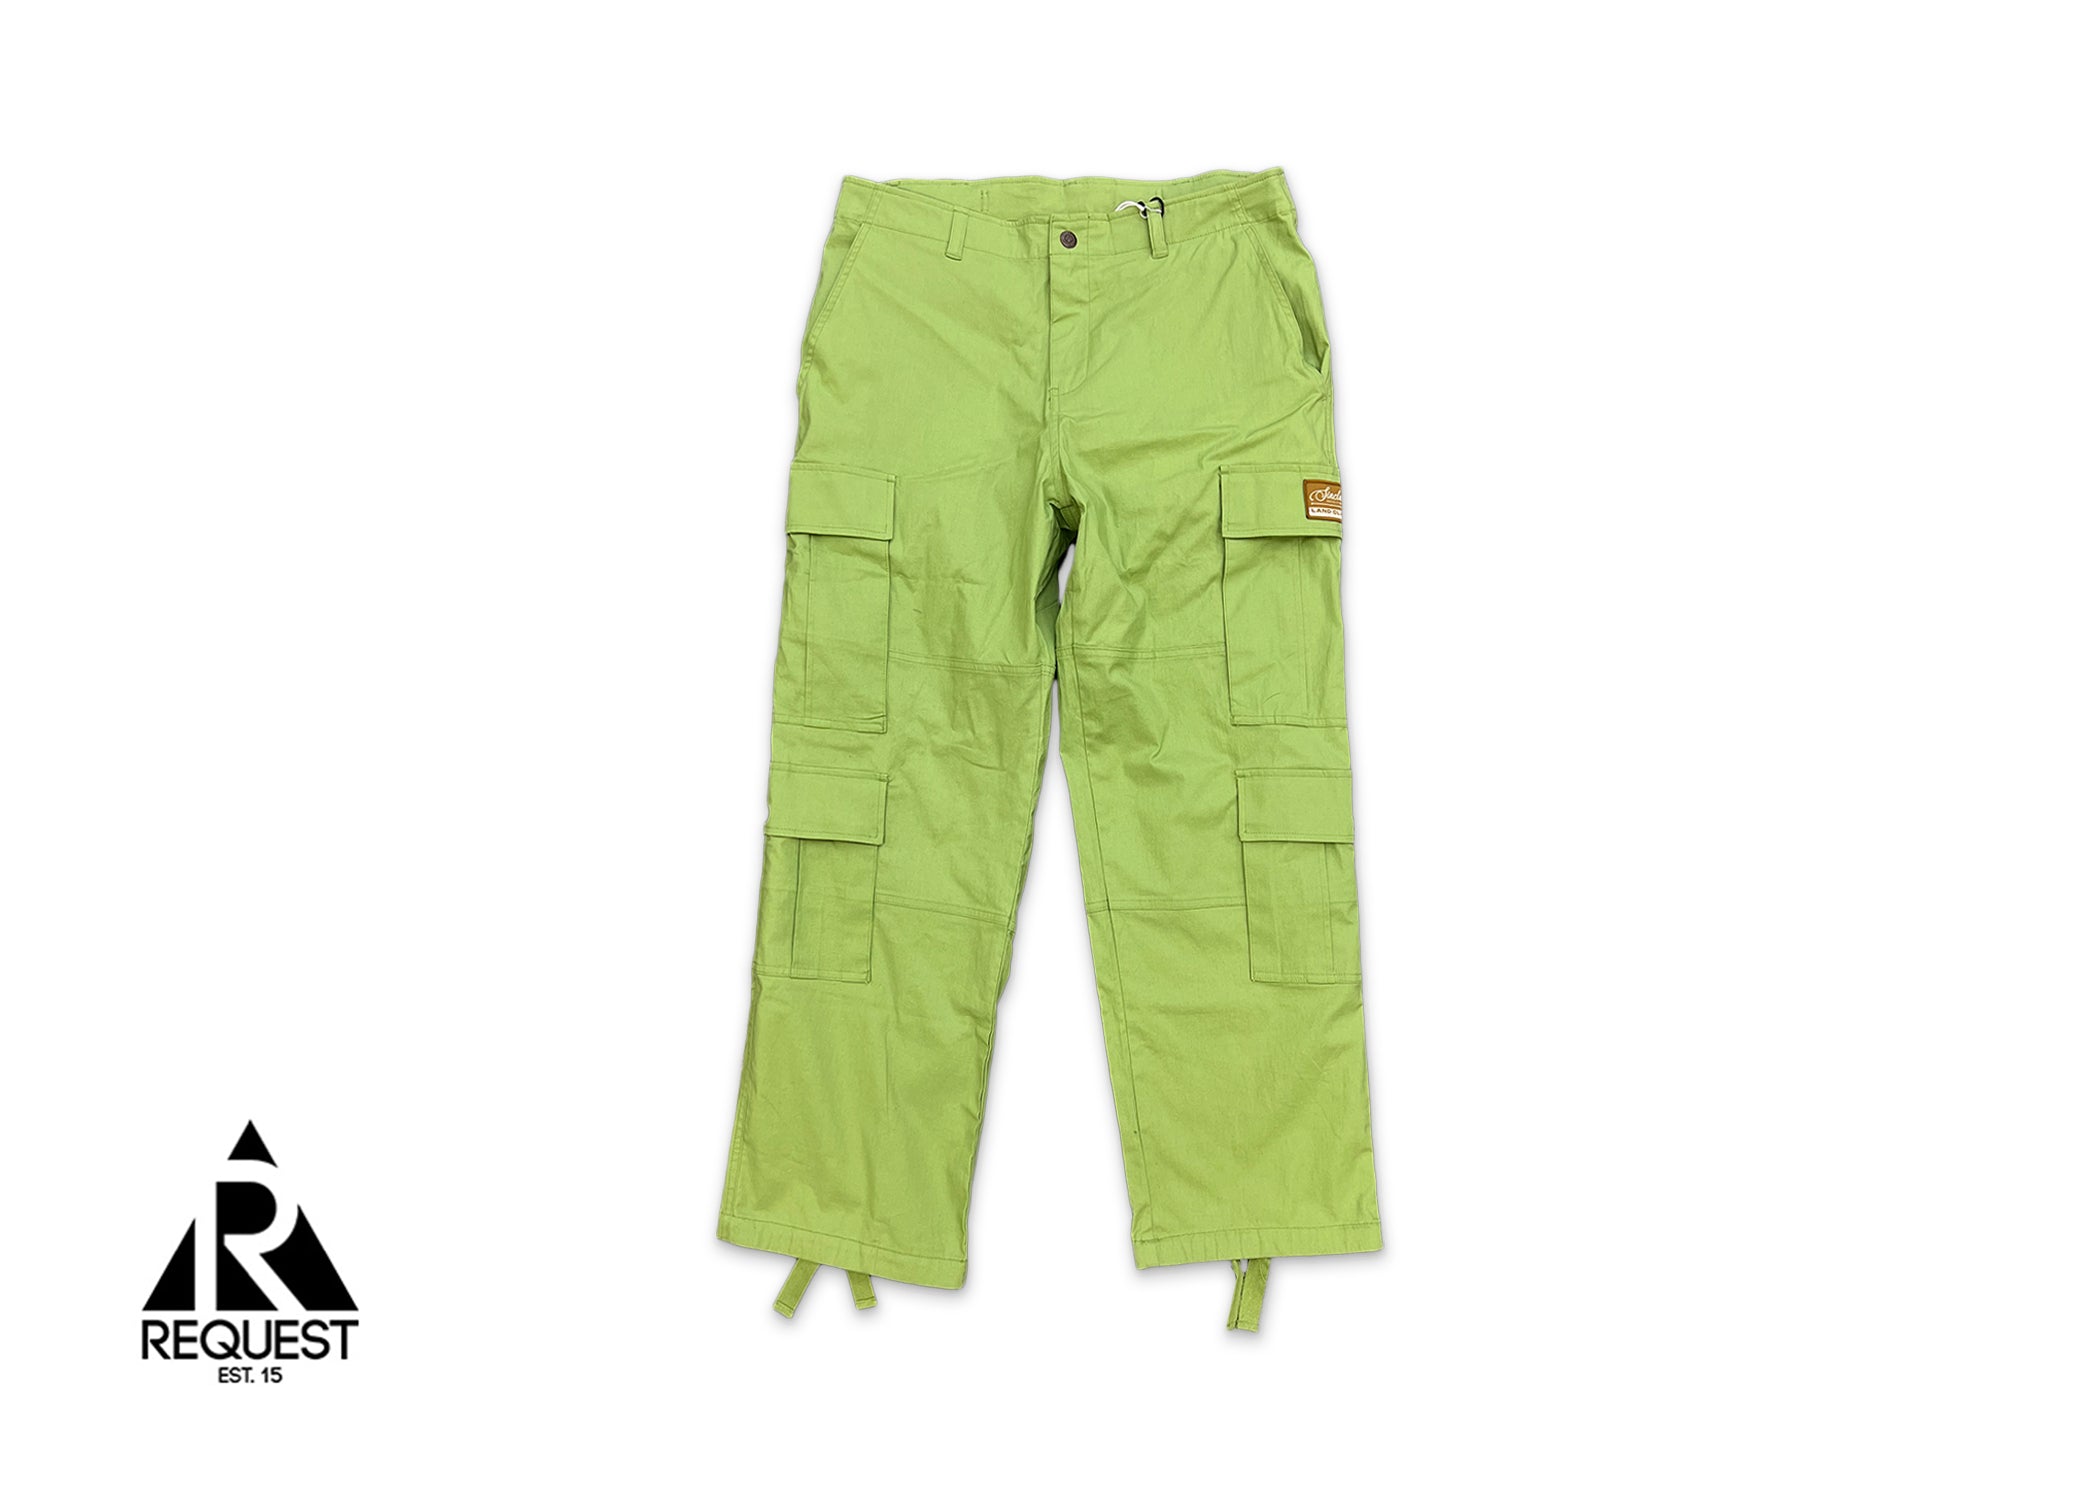 Sinclair RipStop Pants "Olive"